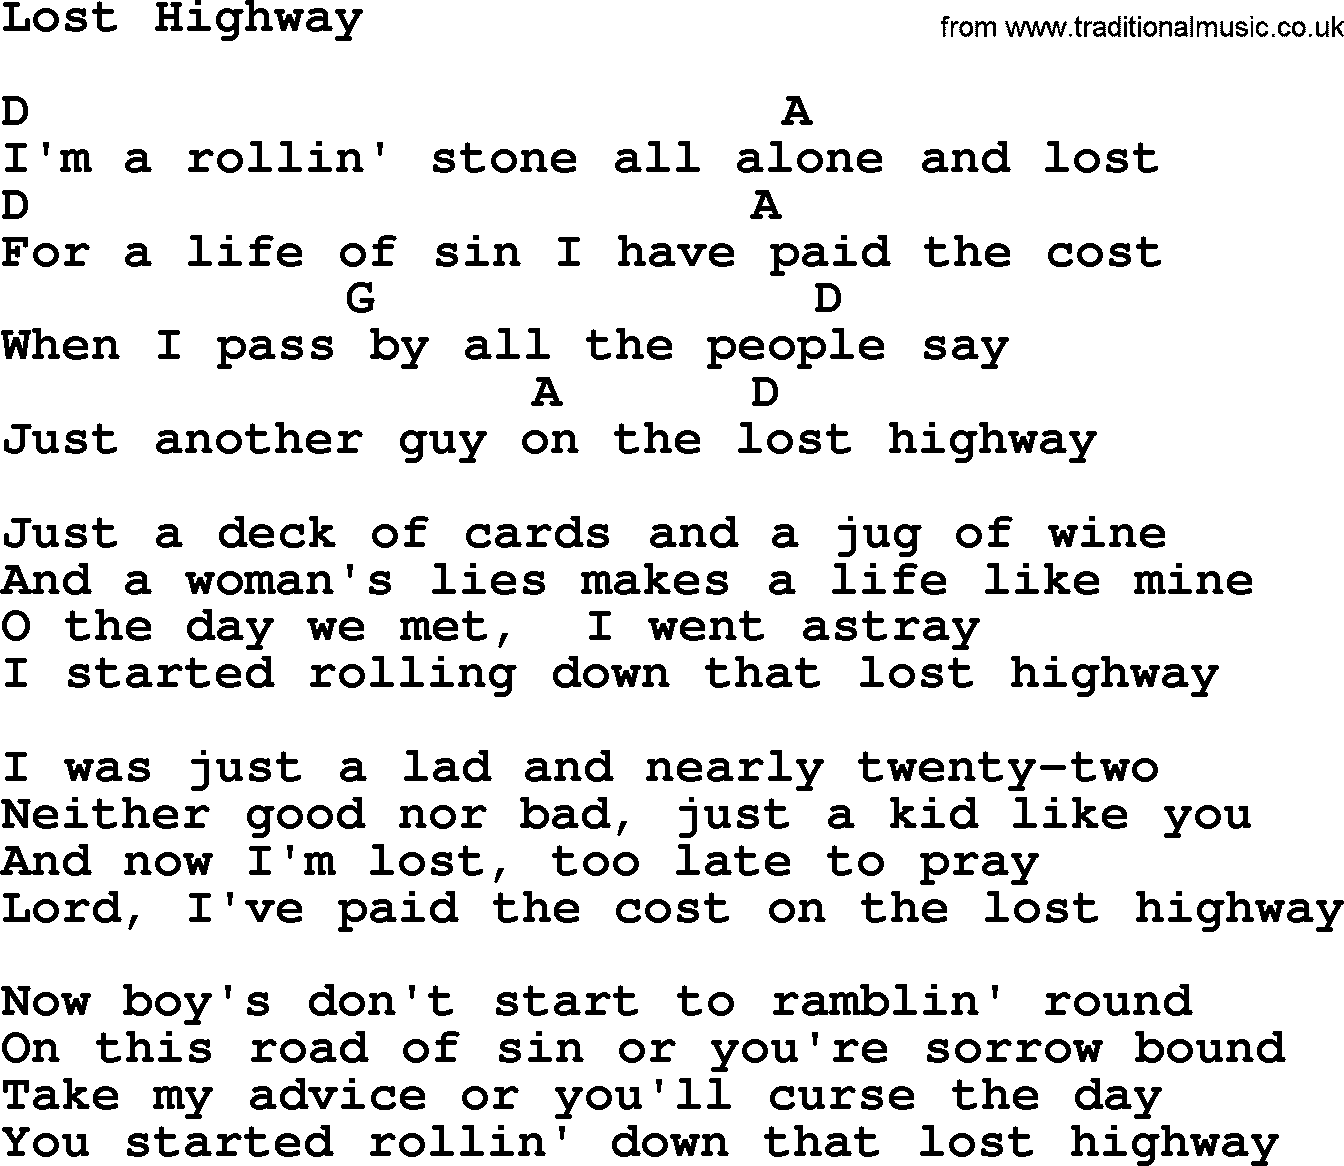 Hank Williams song Lost Highway, lyrics and chords